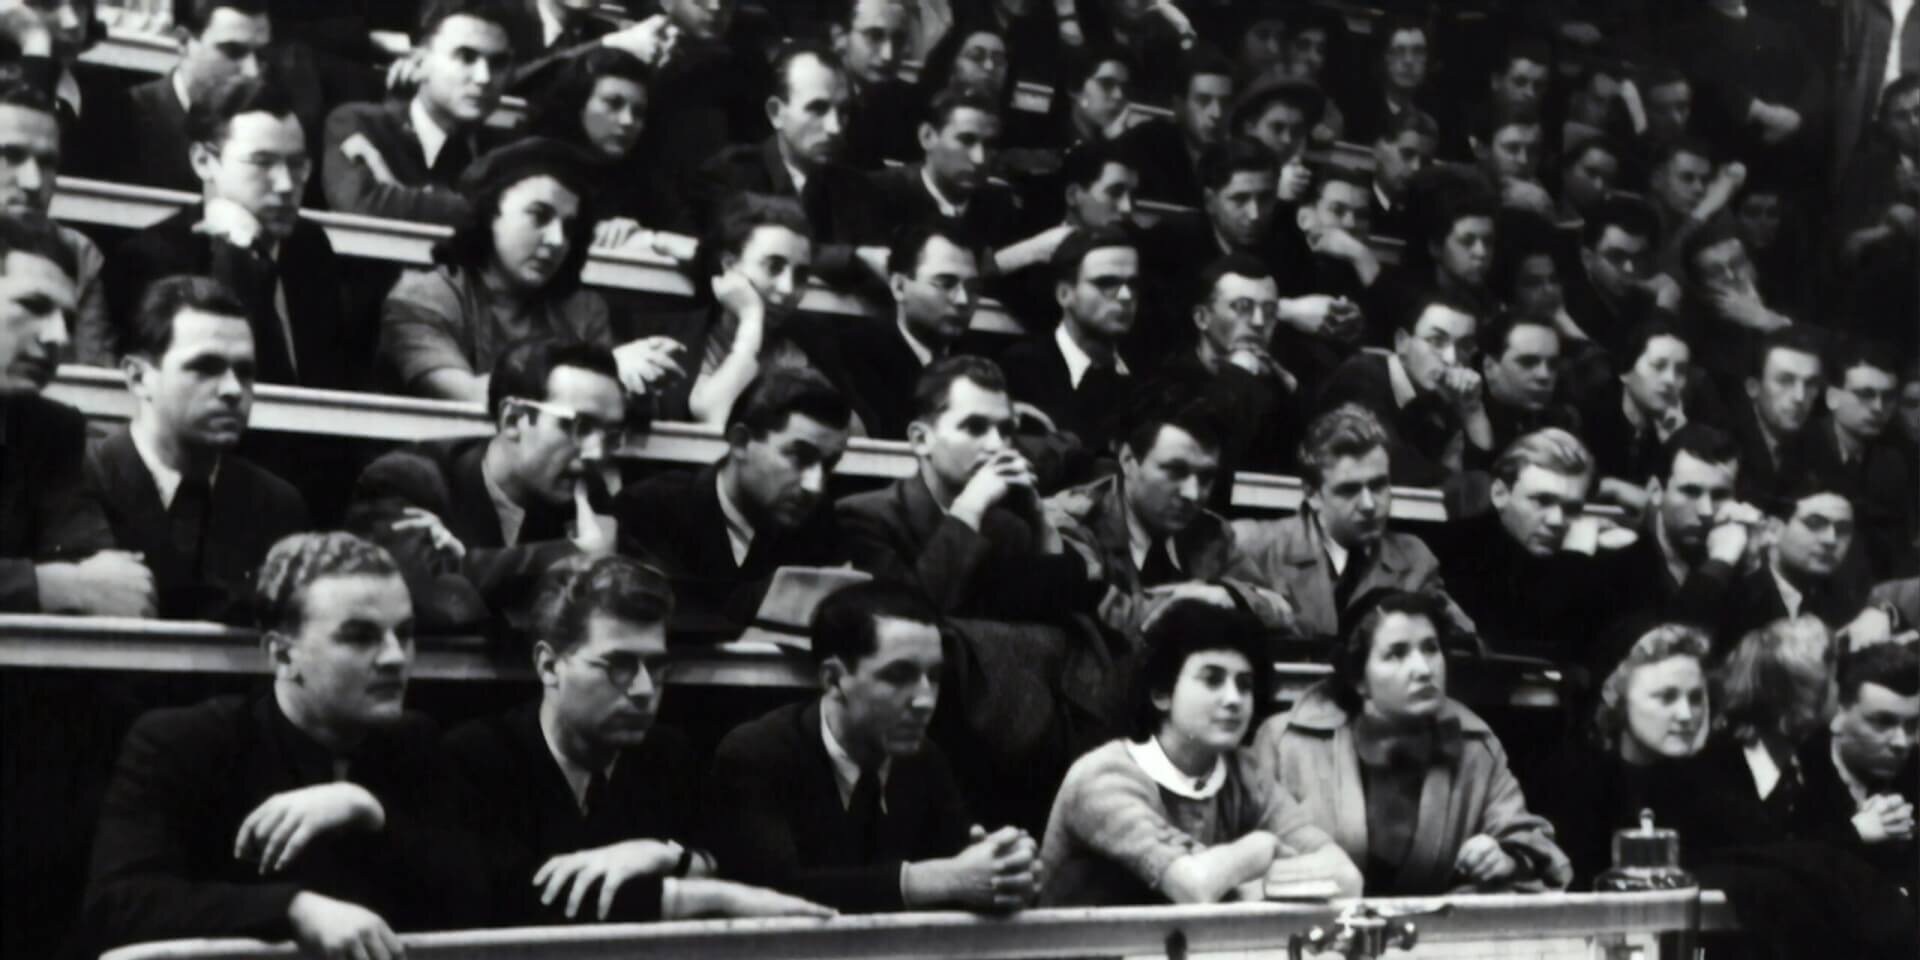 A black and white photo showing students at a lecture by Prof. Leopold Schönbauer in 1948